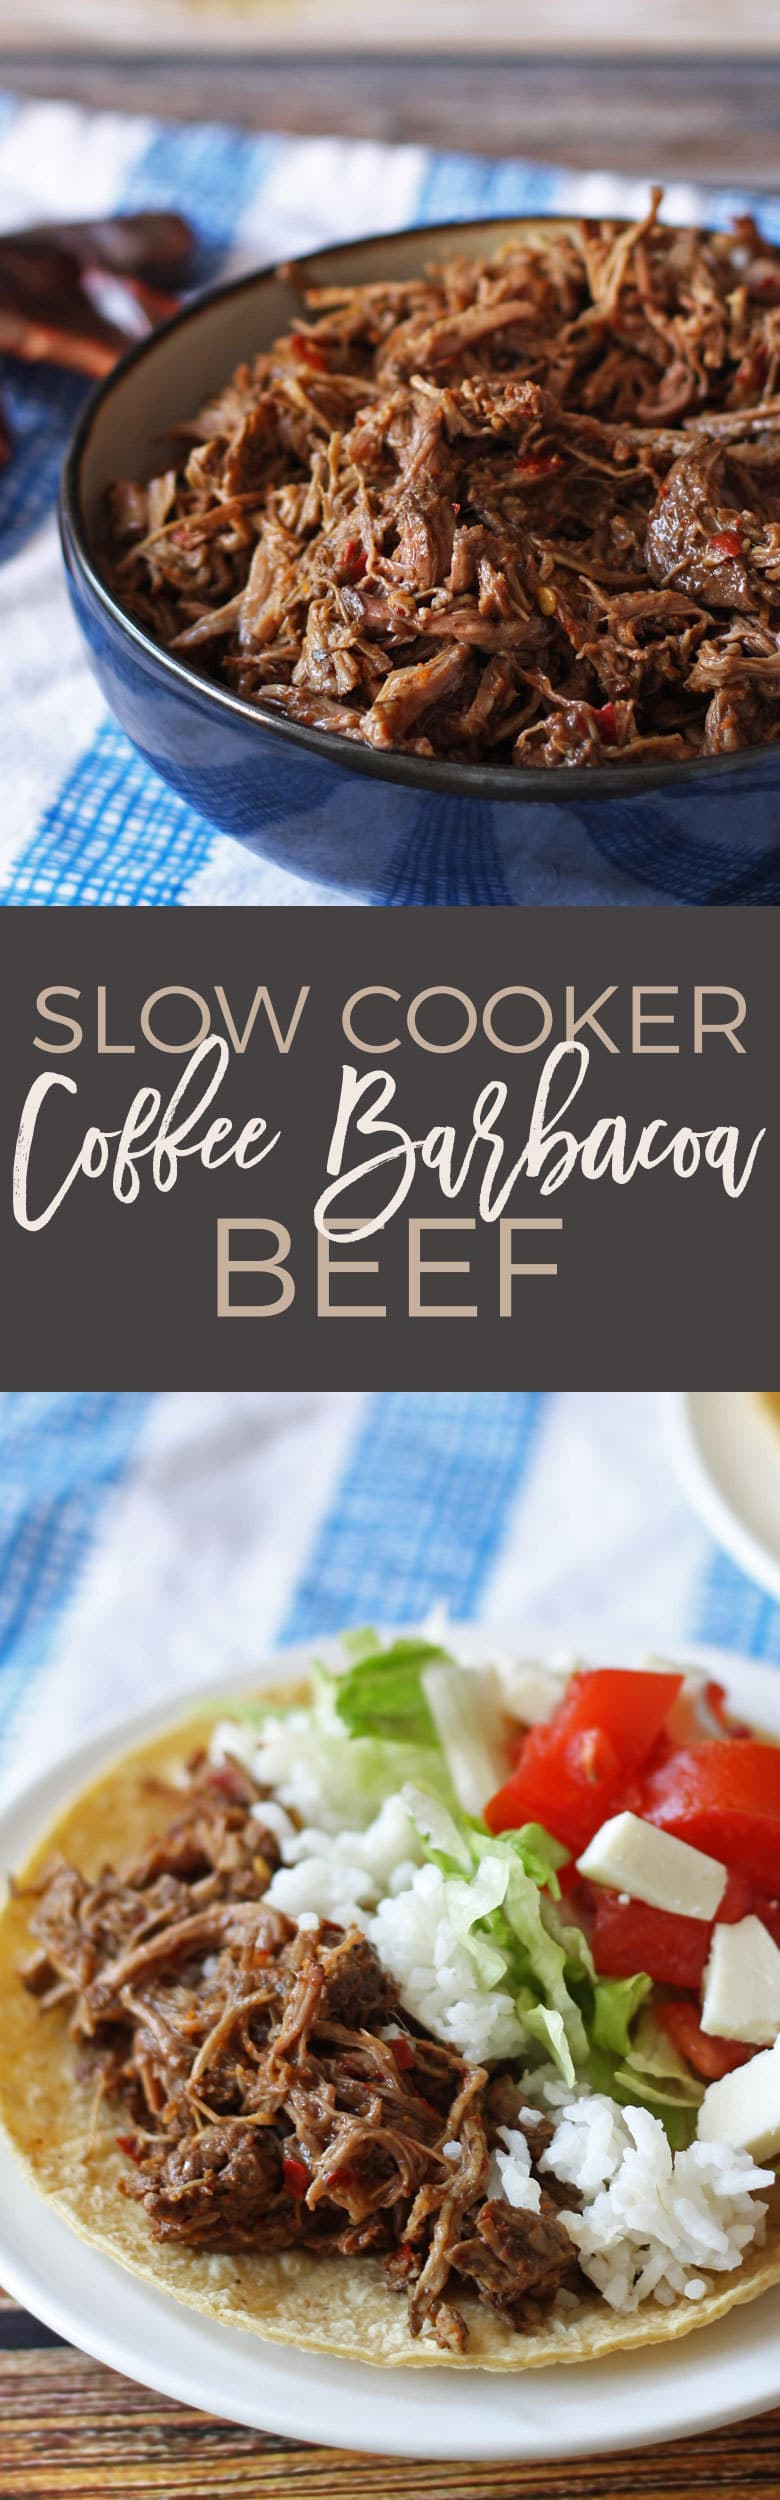 Make this slow cooker coffee barbacoa beef the next time you are in the mood for tacos, burritos or quesadillas! If you’re looking for game day recipes, this is the perfect dinner! | honeyandbirch.com